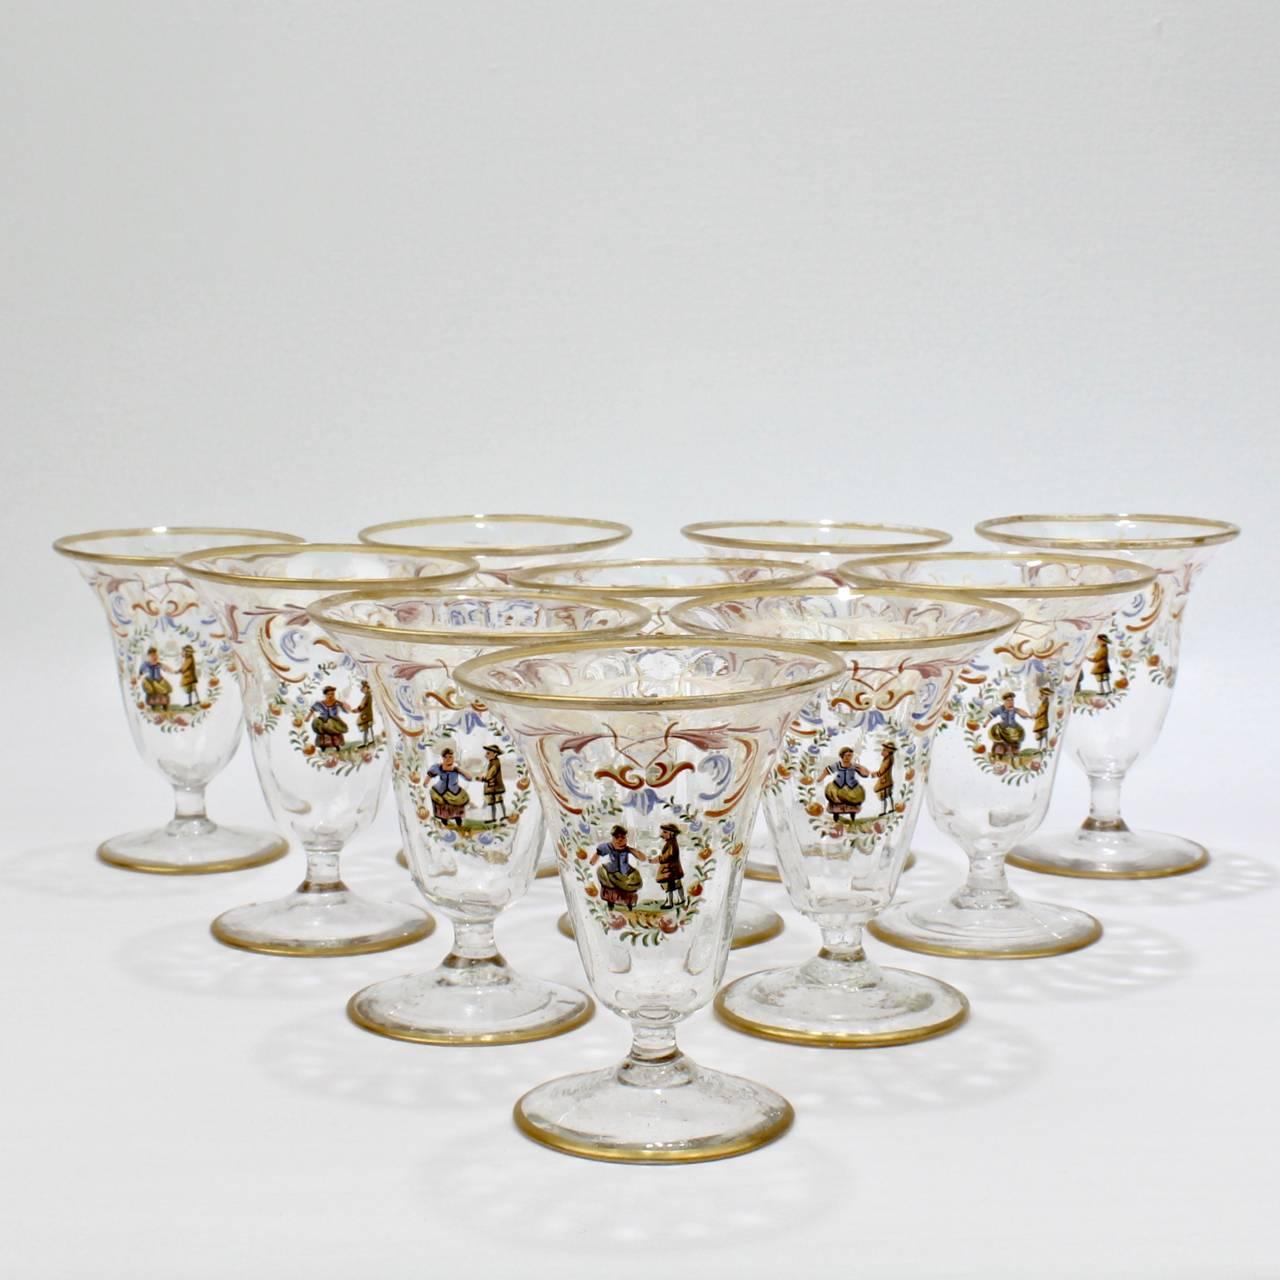 A set of ten enamelled Italian or Venetian glass short stemmed cordial (or possibly Syllabub) glasses. 

With polychrome Florentine enamel decoration, a central cartouche bearing a peasant couple surrounded by a wreath with rose, and gilded feet